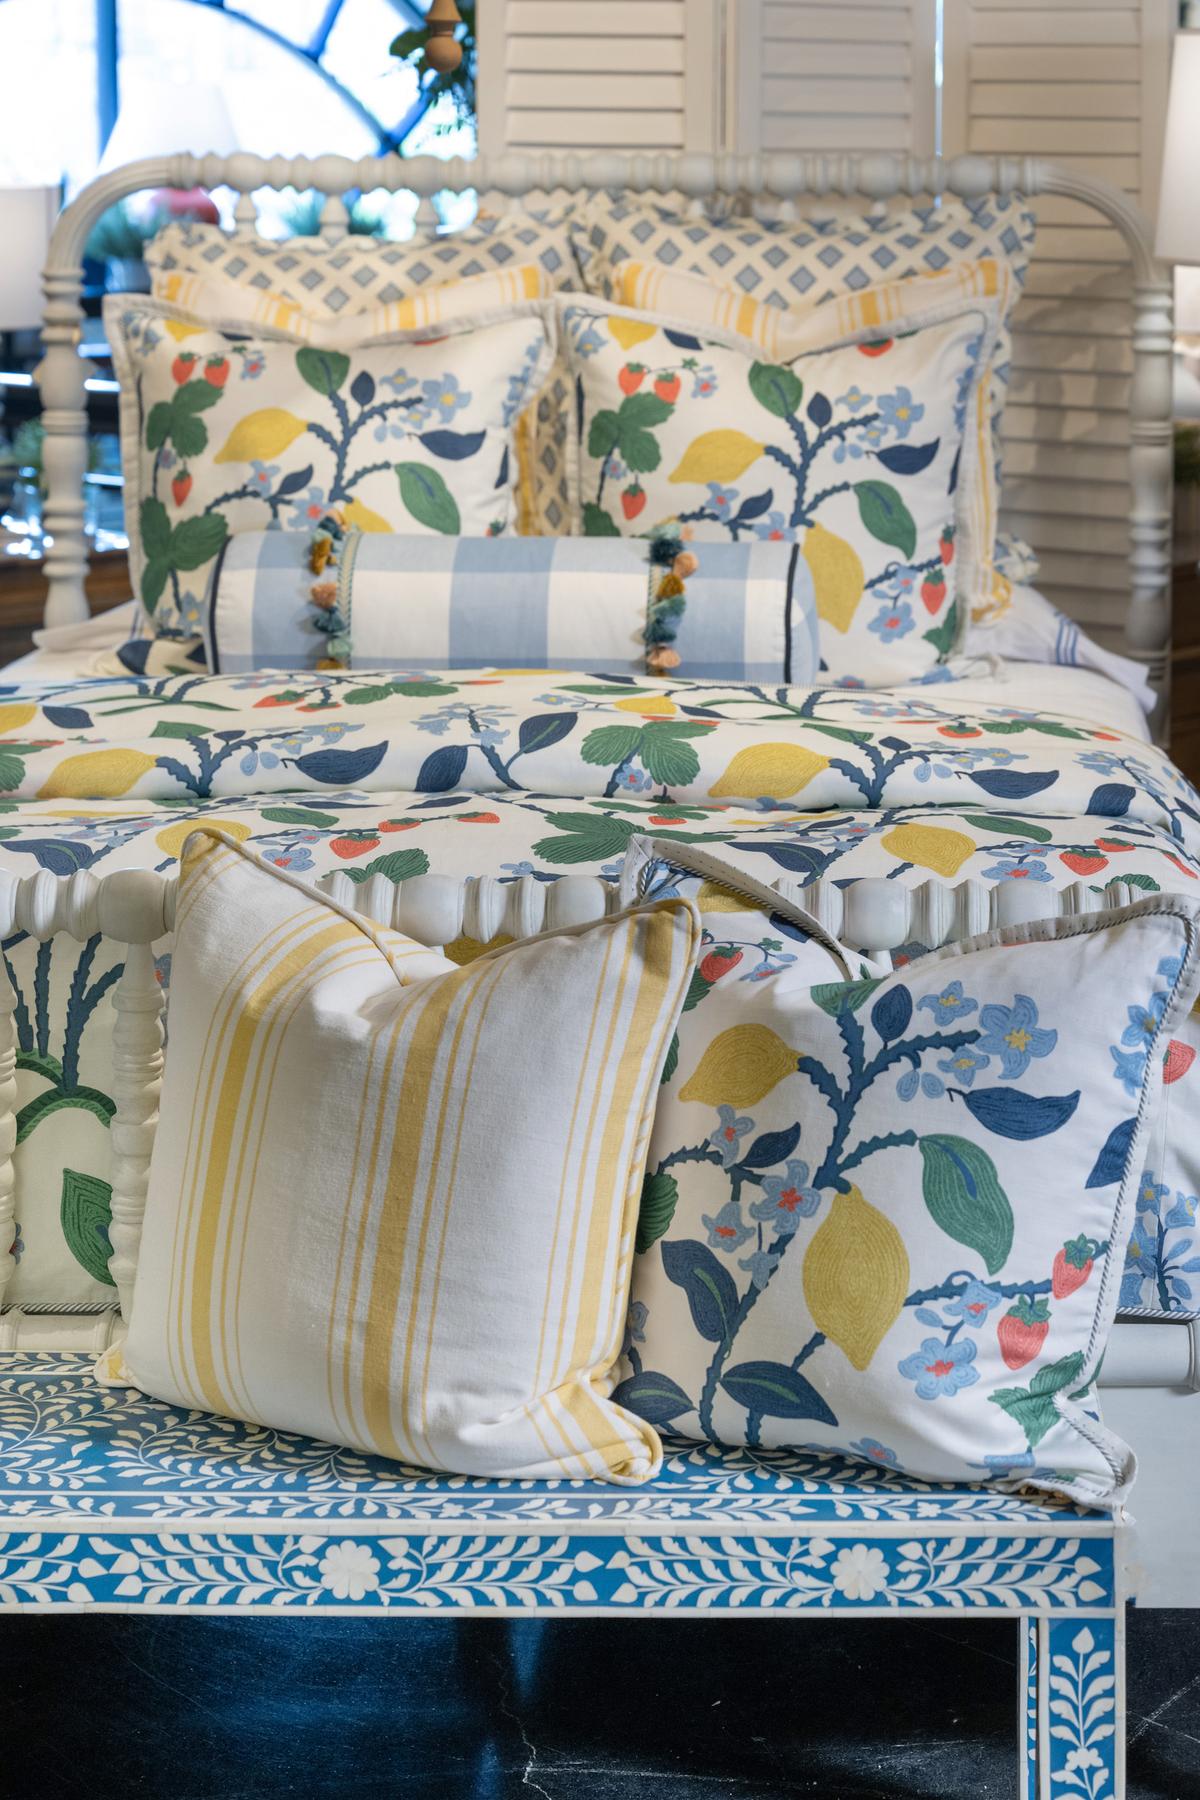 Many pillow trim options working together create an elevated look to this designer bedding set. (Provided photo/TNS)